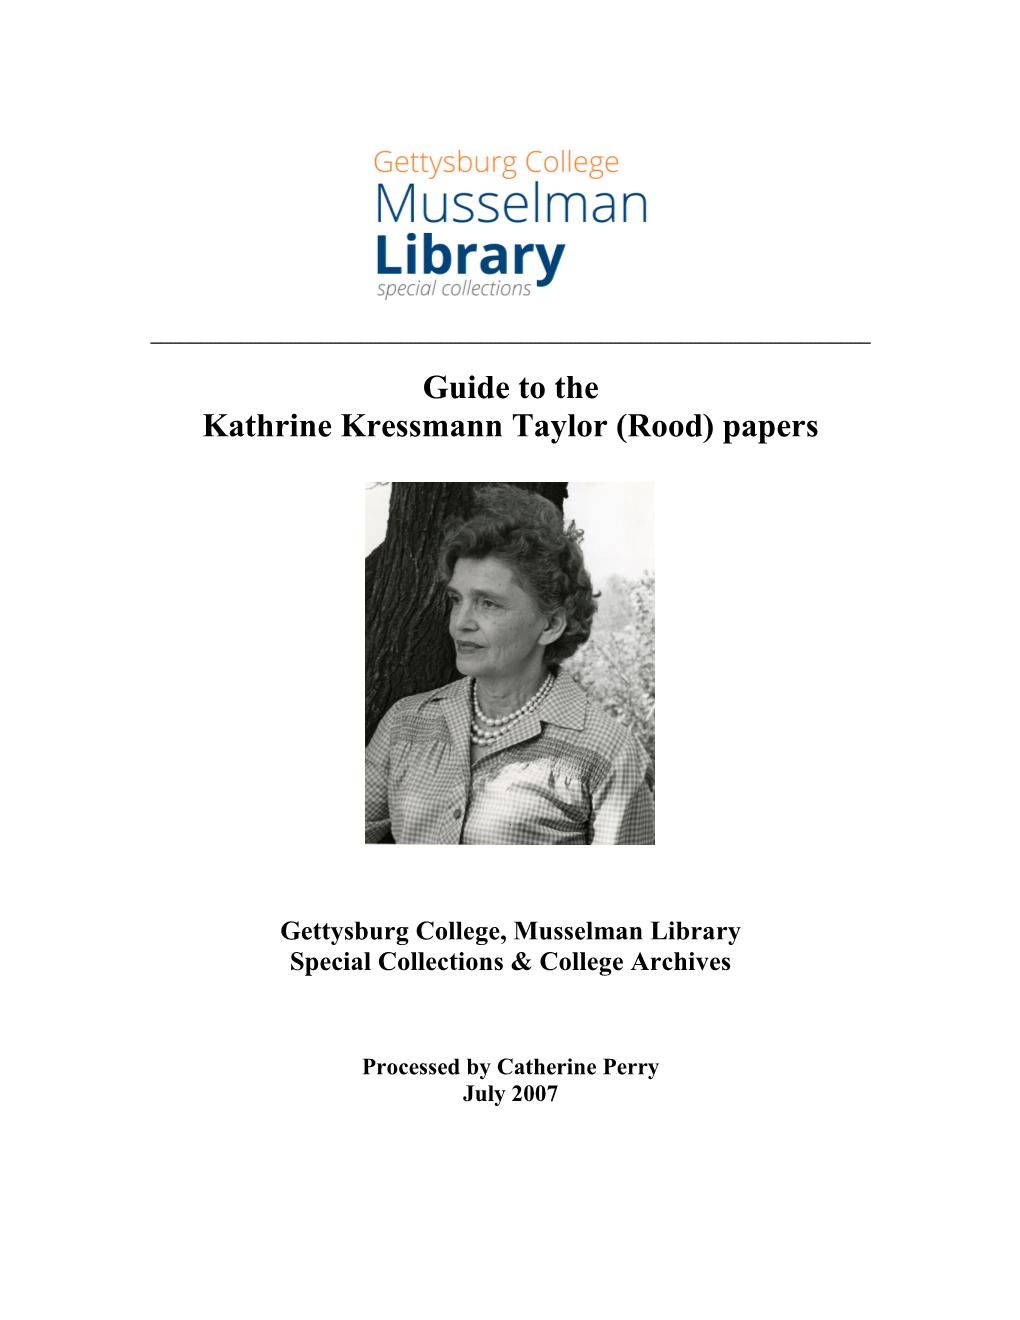 Guide to the Kathrine Kressmann Taylor (Rood) Papers